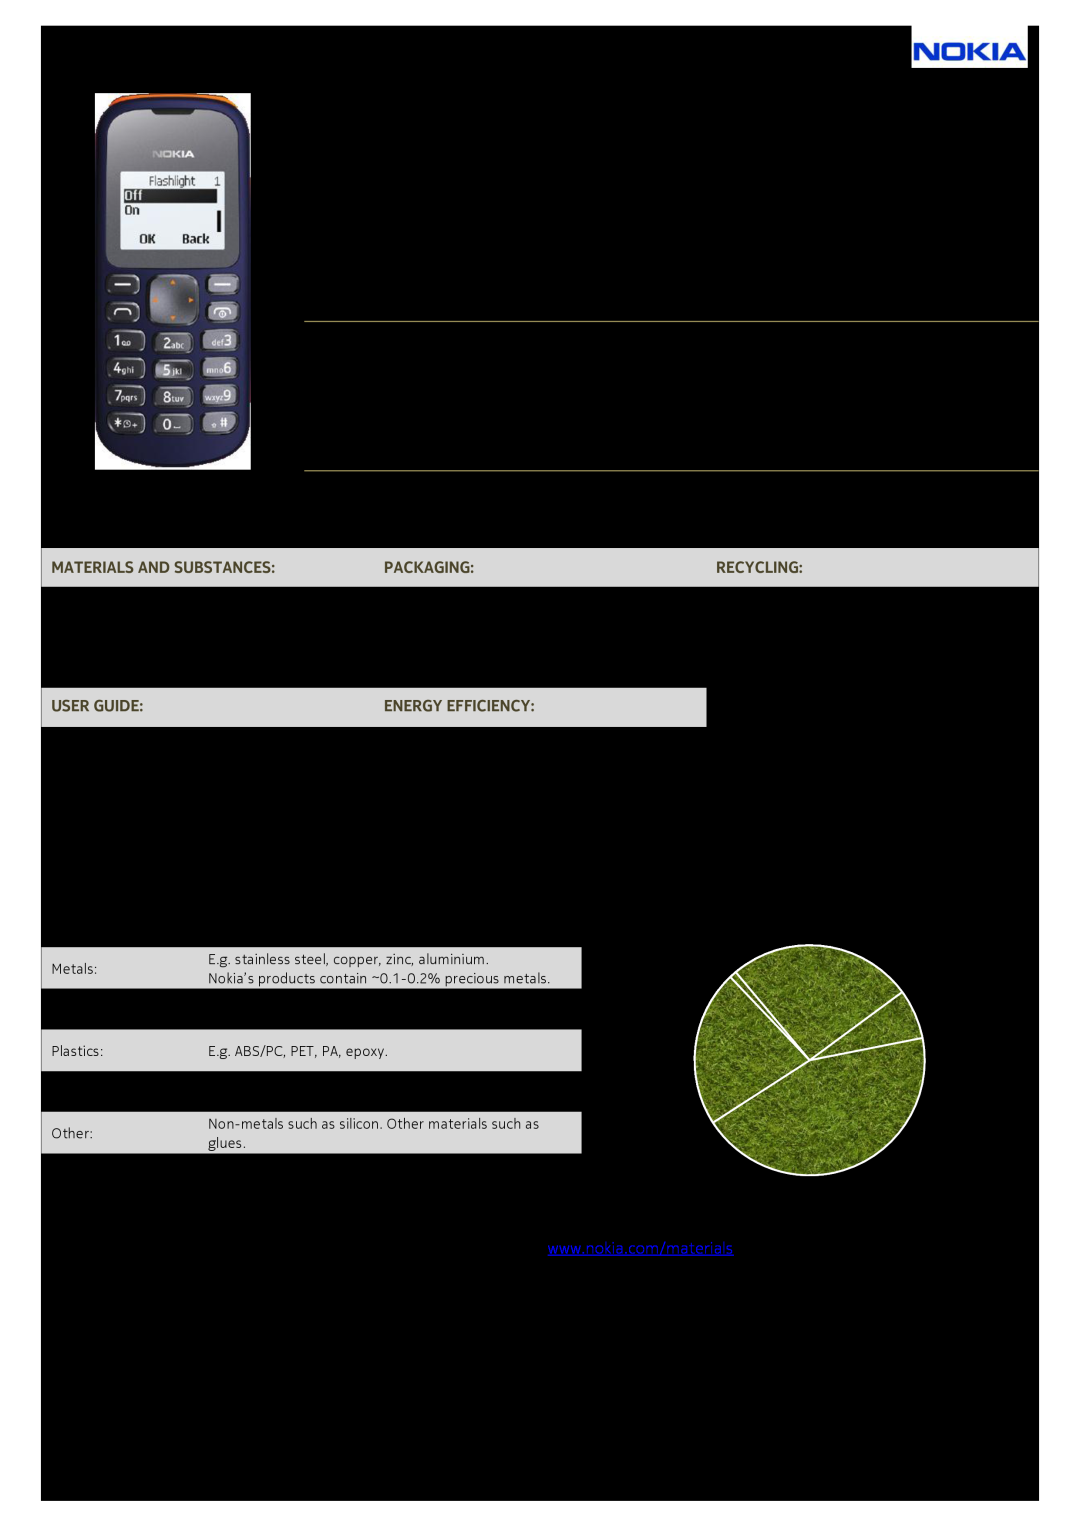 Nokia 103 dimensions Environmental features, Materials used, 12.04.2012, Nokia, Eco profile, Materials And Substances 